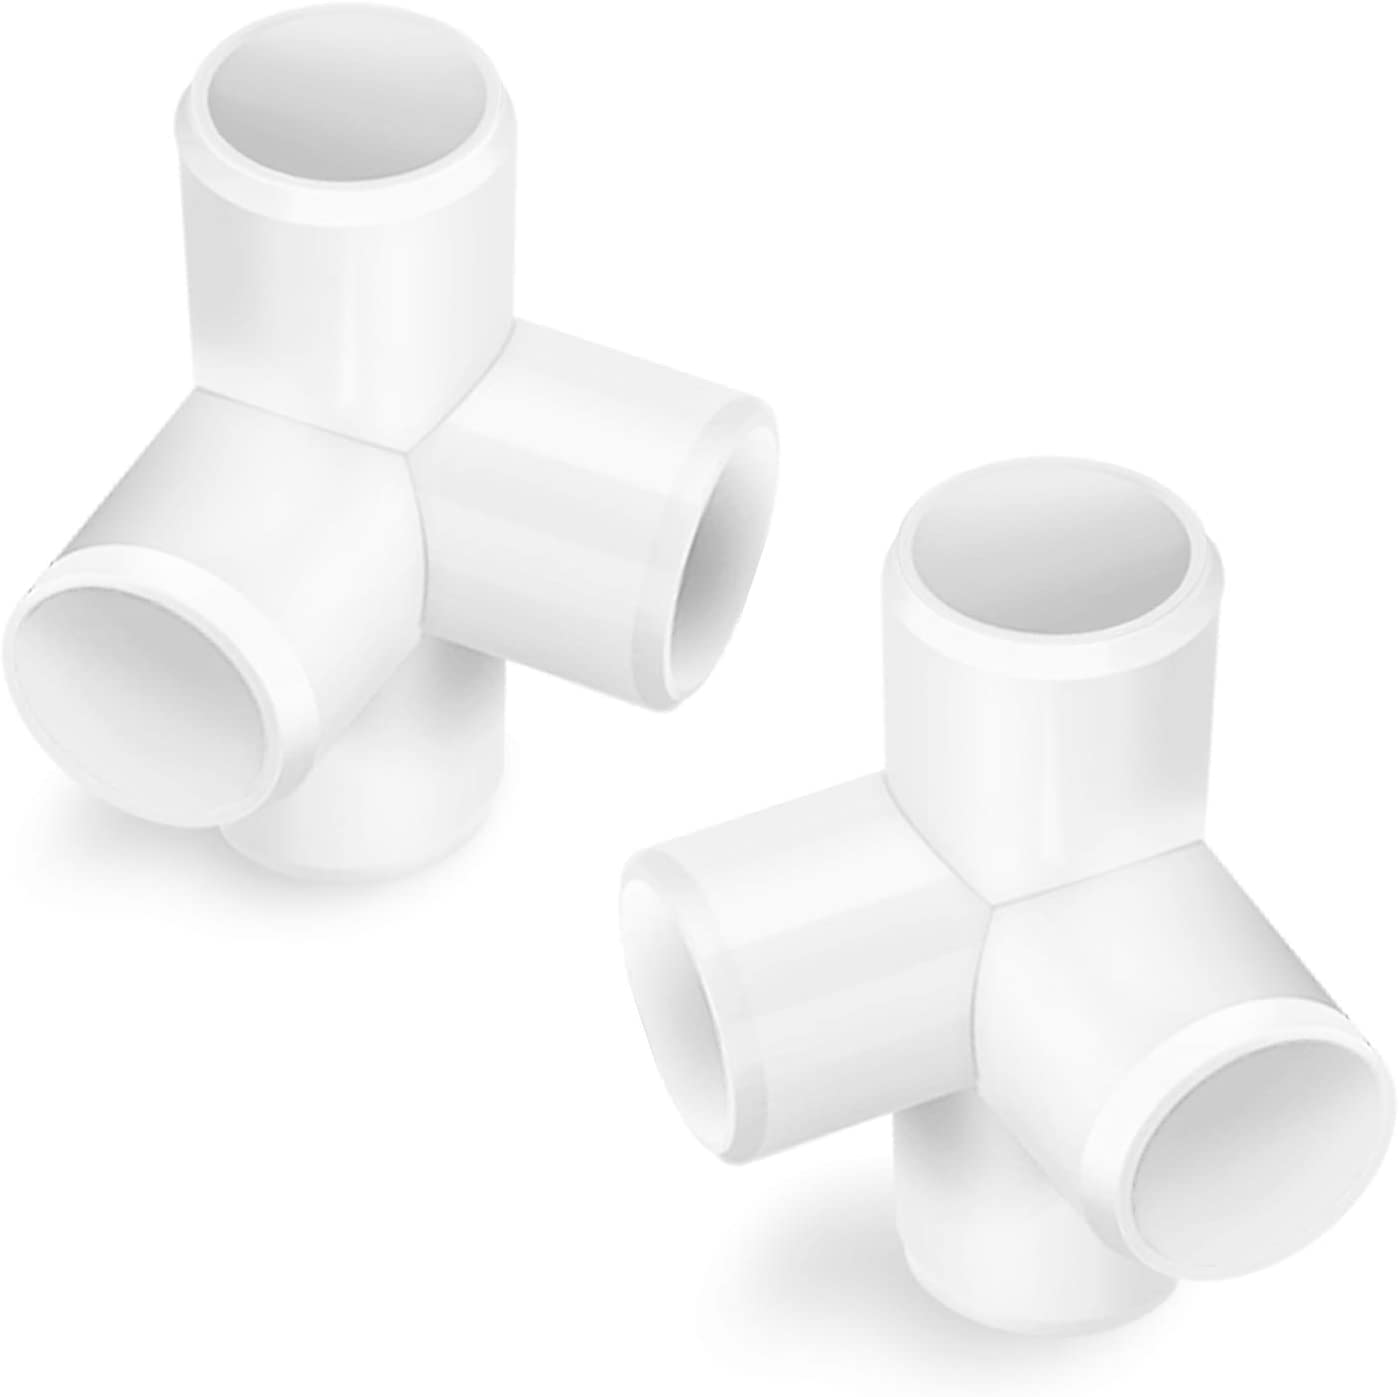 12 pack 4 Way 1/2 inch PVC Fitting Corner Cross Elbow, 1/2" PVC Fitting Elbow for Greenhouse Shed Pipe, Tent Connection, Furniture Build Grade SCH40